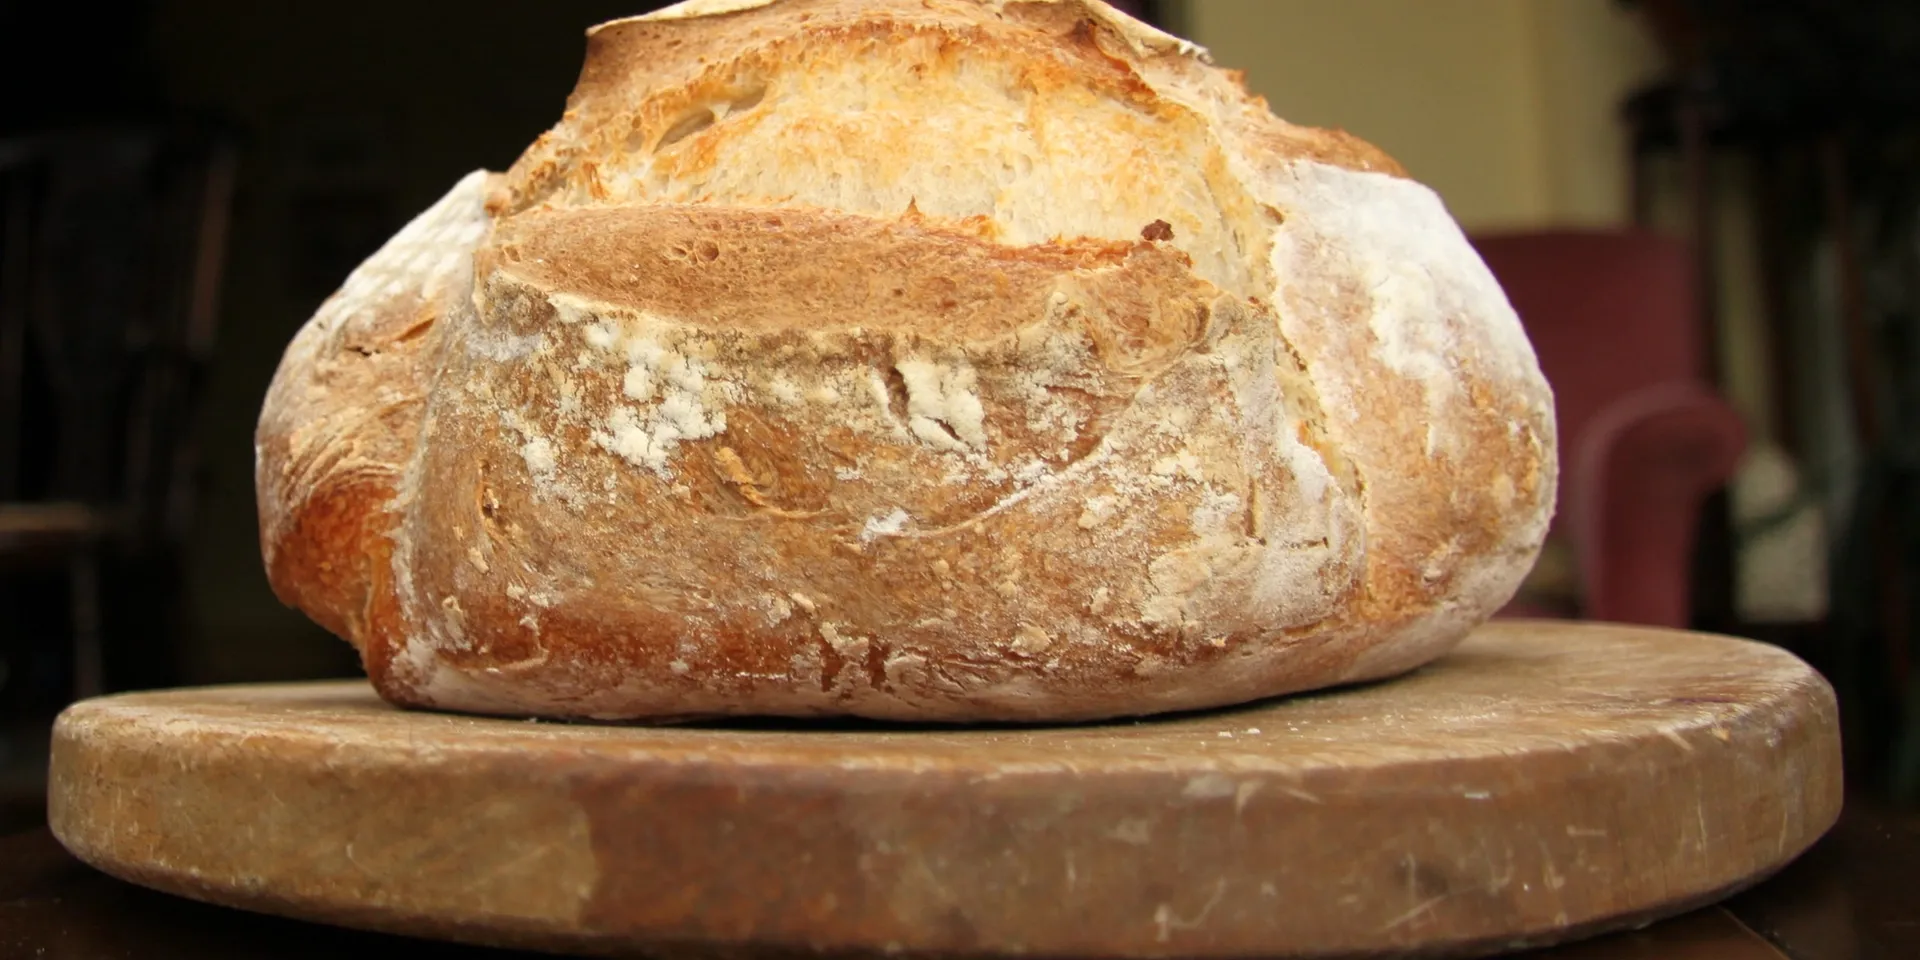 "Sourdough loaf" by muffinn is licensed under CC BY 2.0. To view a copy of this license, visit https://creativecommons.org/licenses/by/2.0/?ref=openverse.